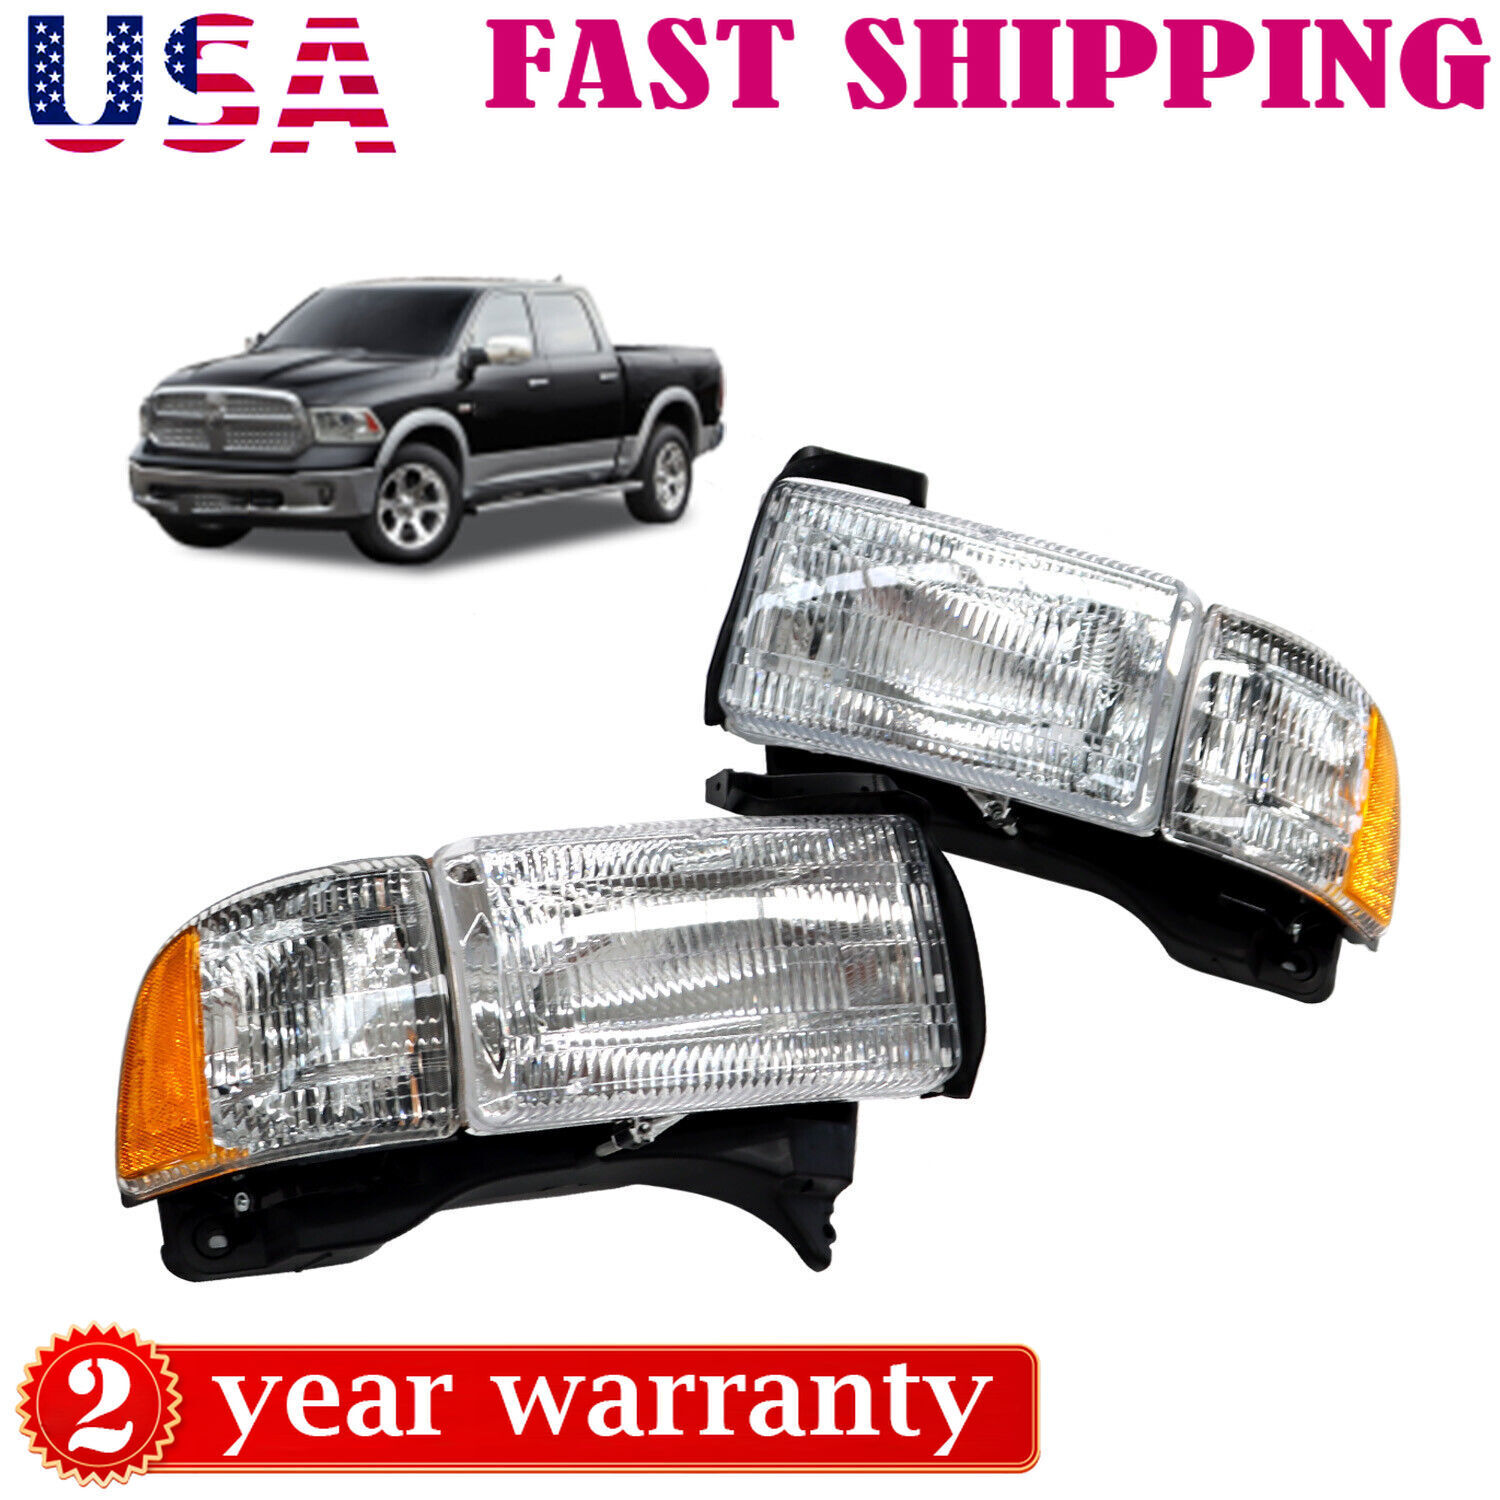 New Headlights Head Lamps Set Fit For 94-01 Dodge Ram 1500 2500 3500